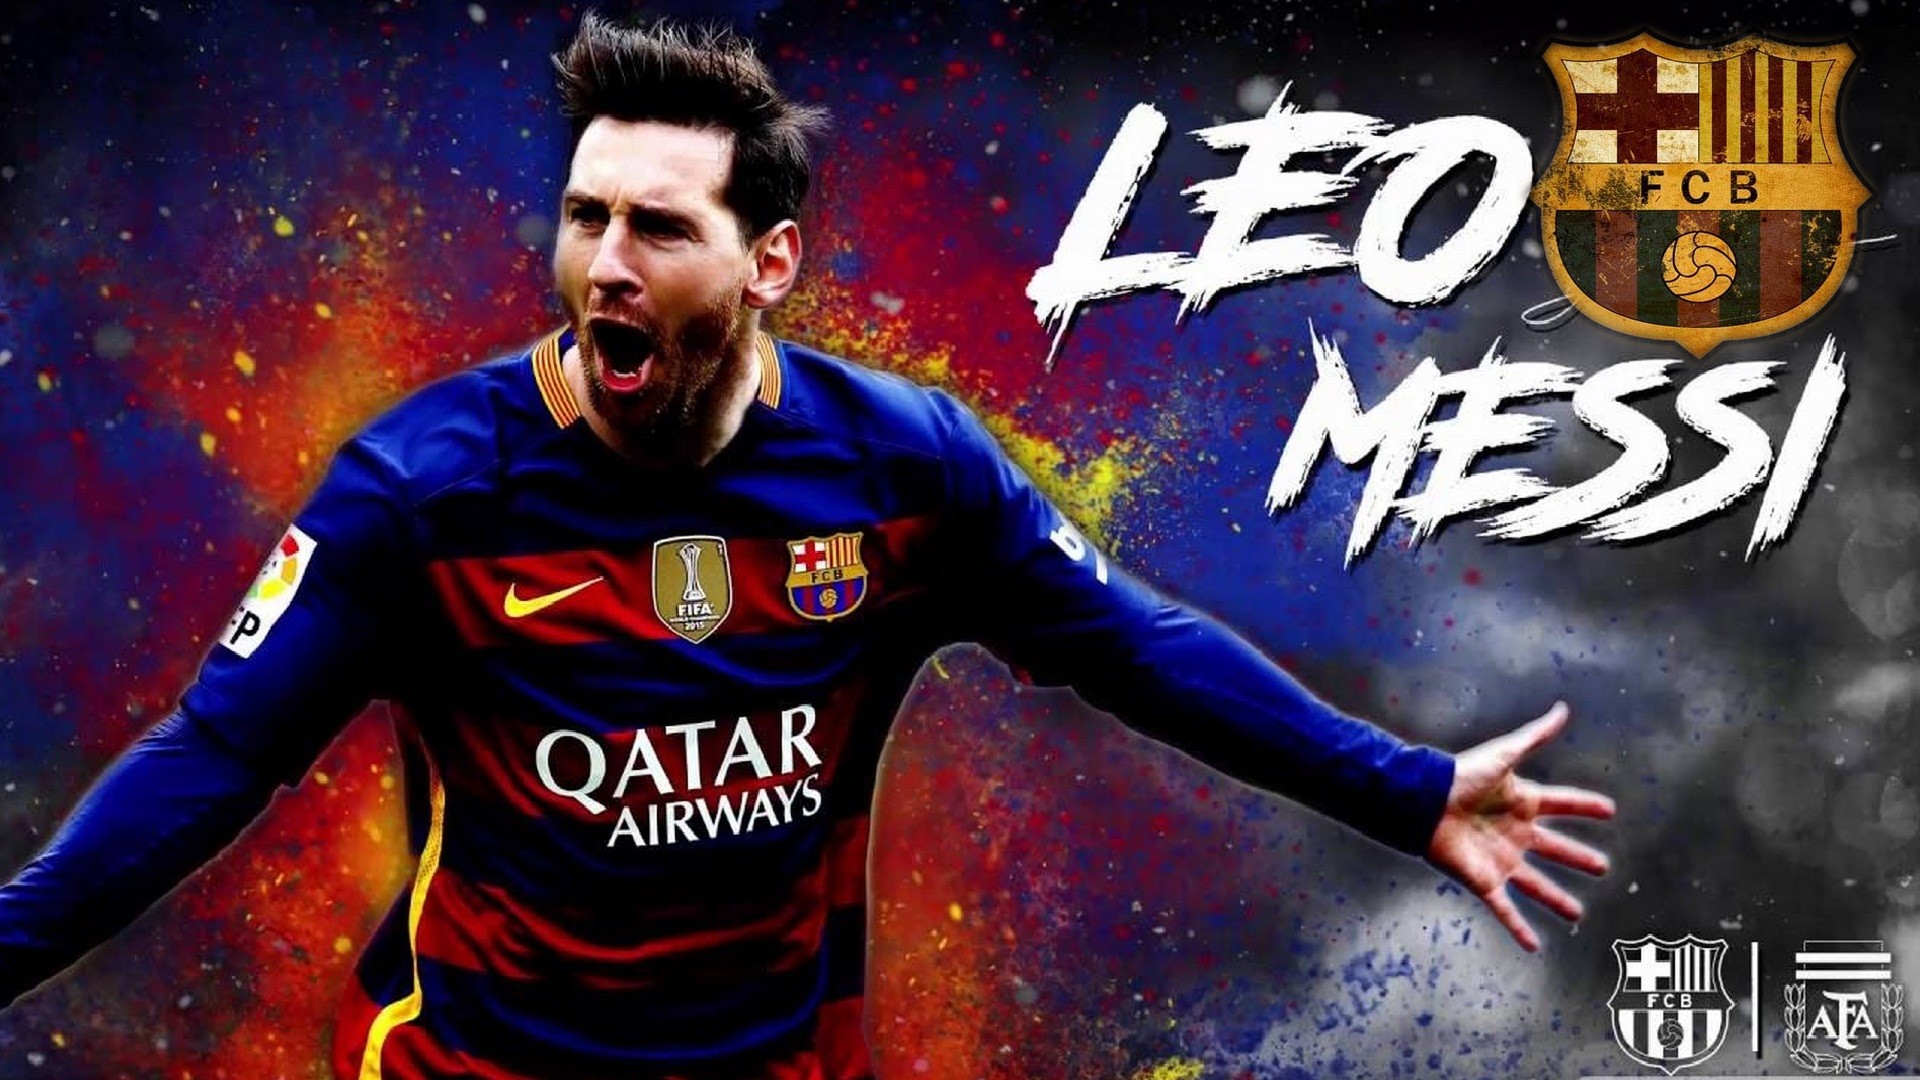 Messi Wallpaper With Resolution 1920X1080 pixel. You can make this wallpaper for your Mac or Windows Desktop Background, iPhone, Android or Tablet and another Smartphone device for free